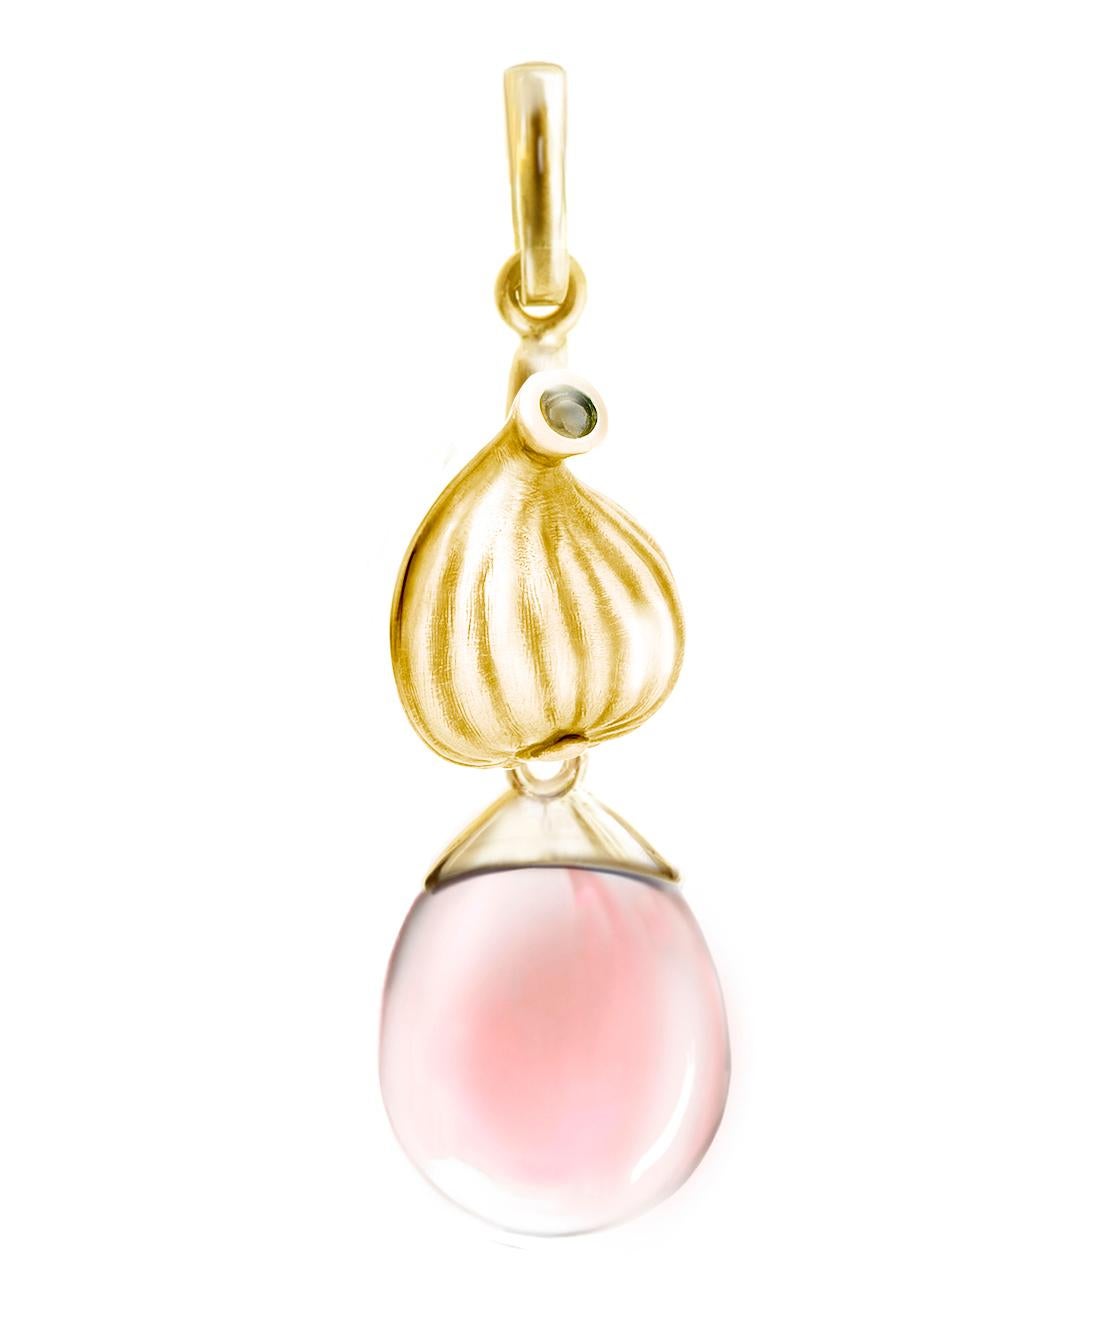 This pendant necklace features a drop with a natural rose quartz cabochon and diamond, and is made of yellow gold-plated sterling silver. The gemstone drop is open to the light, making it sparkle. This collection was featured in Vogue Ukraine.

The